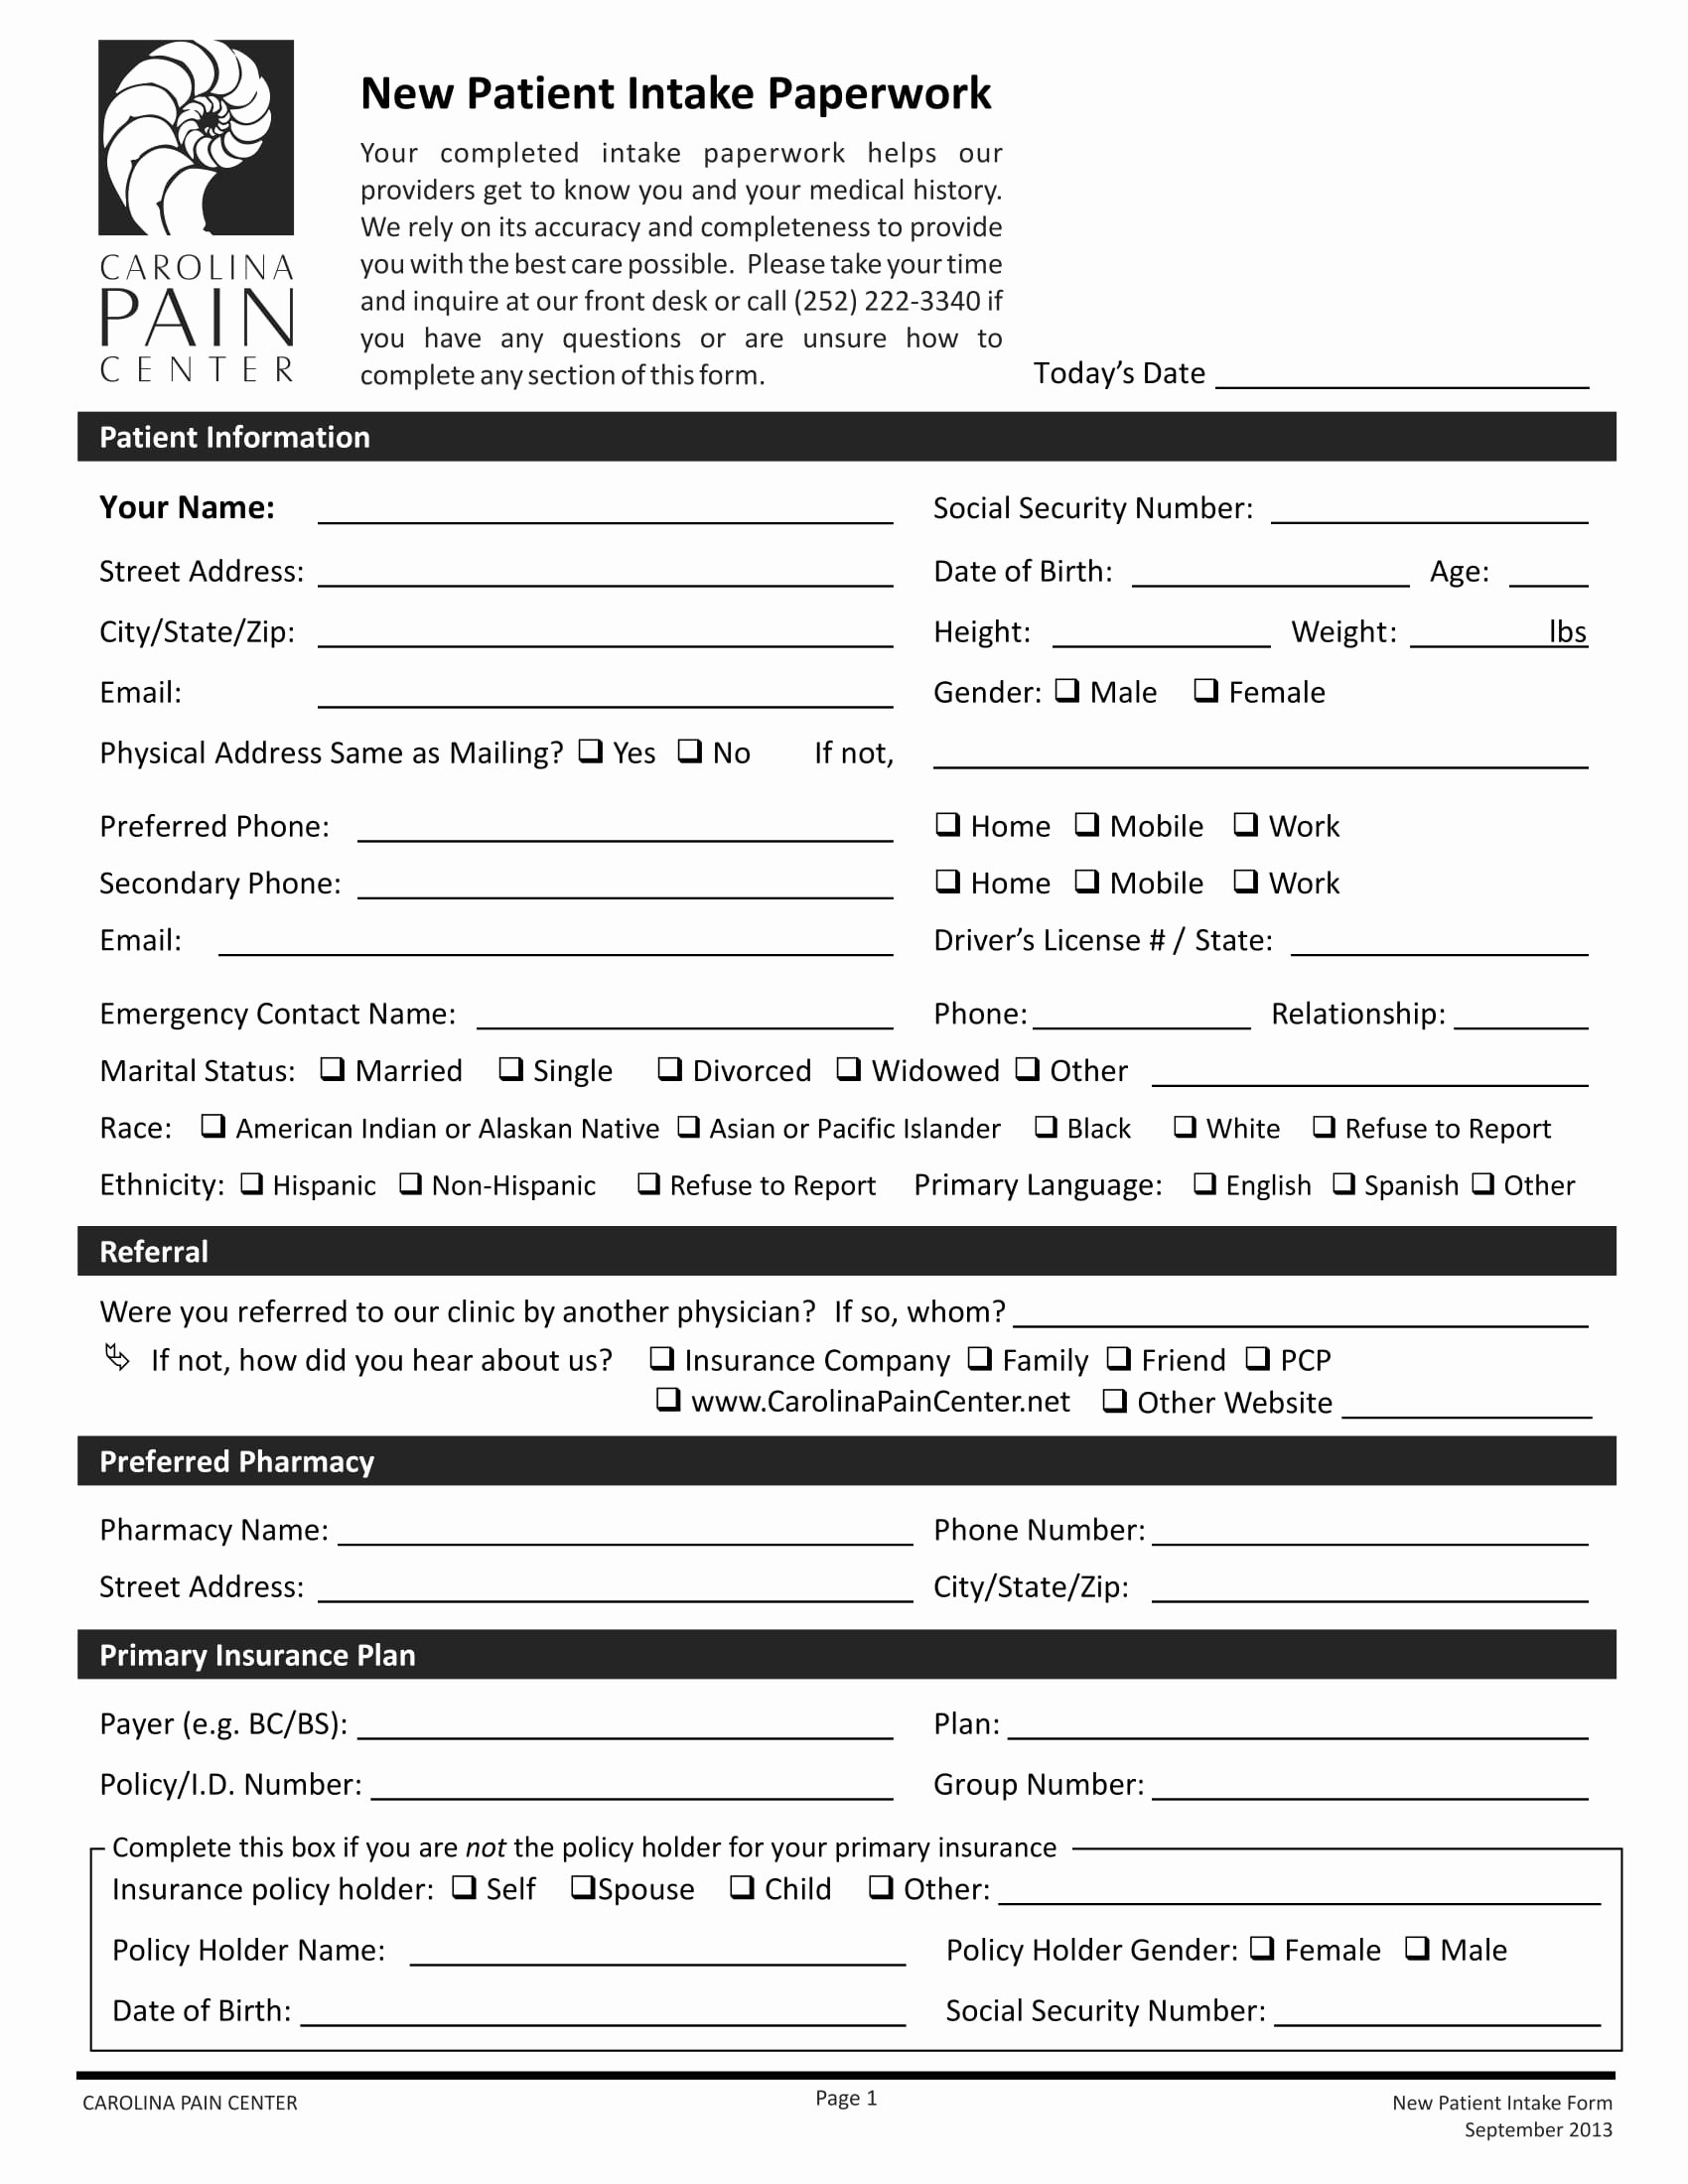 New Patient form Template Fresh Free 4 New Patient Intake forms